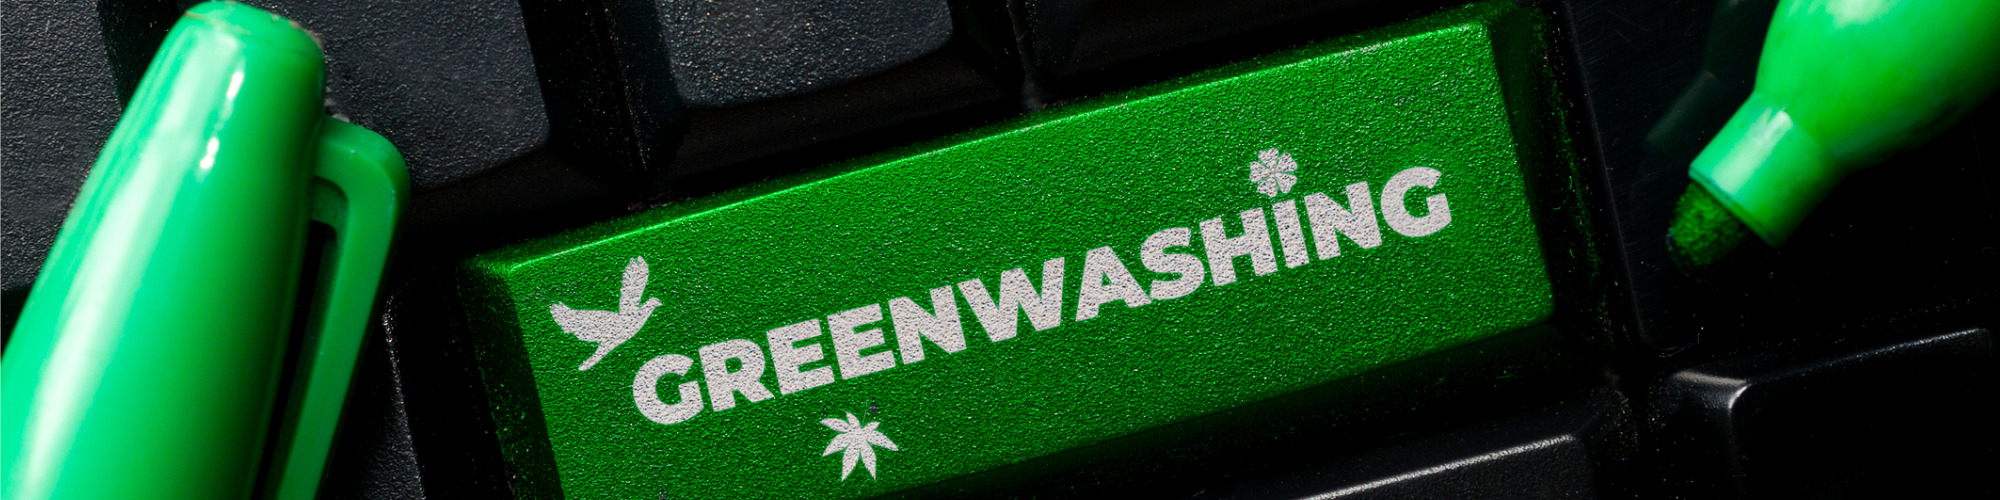 Greenwashing Clampdown - A Guide for Marketing Professionals 